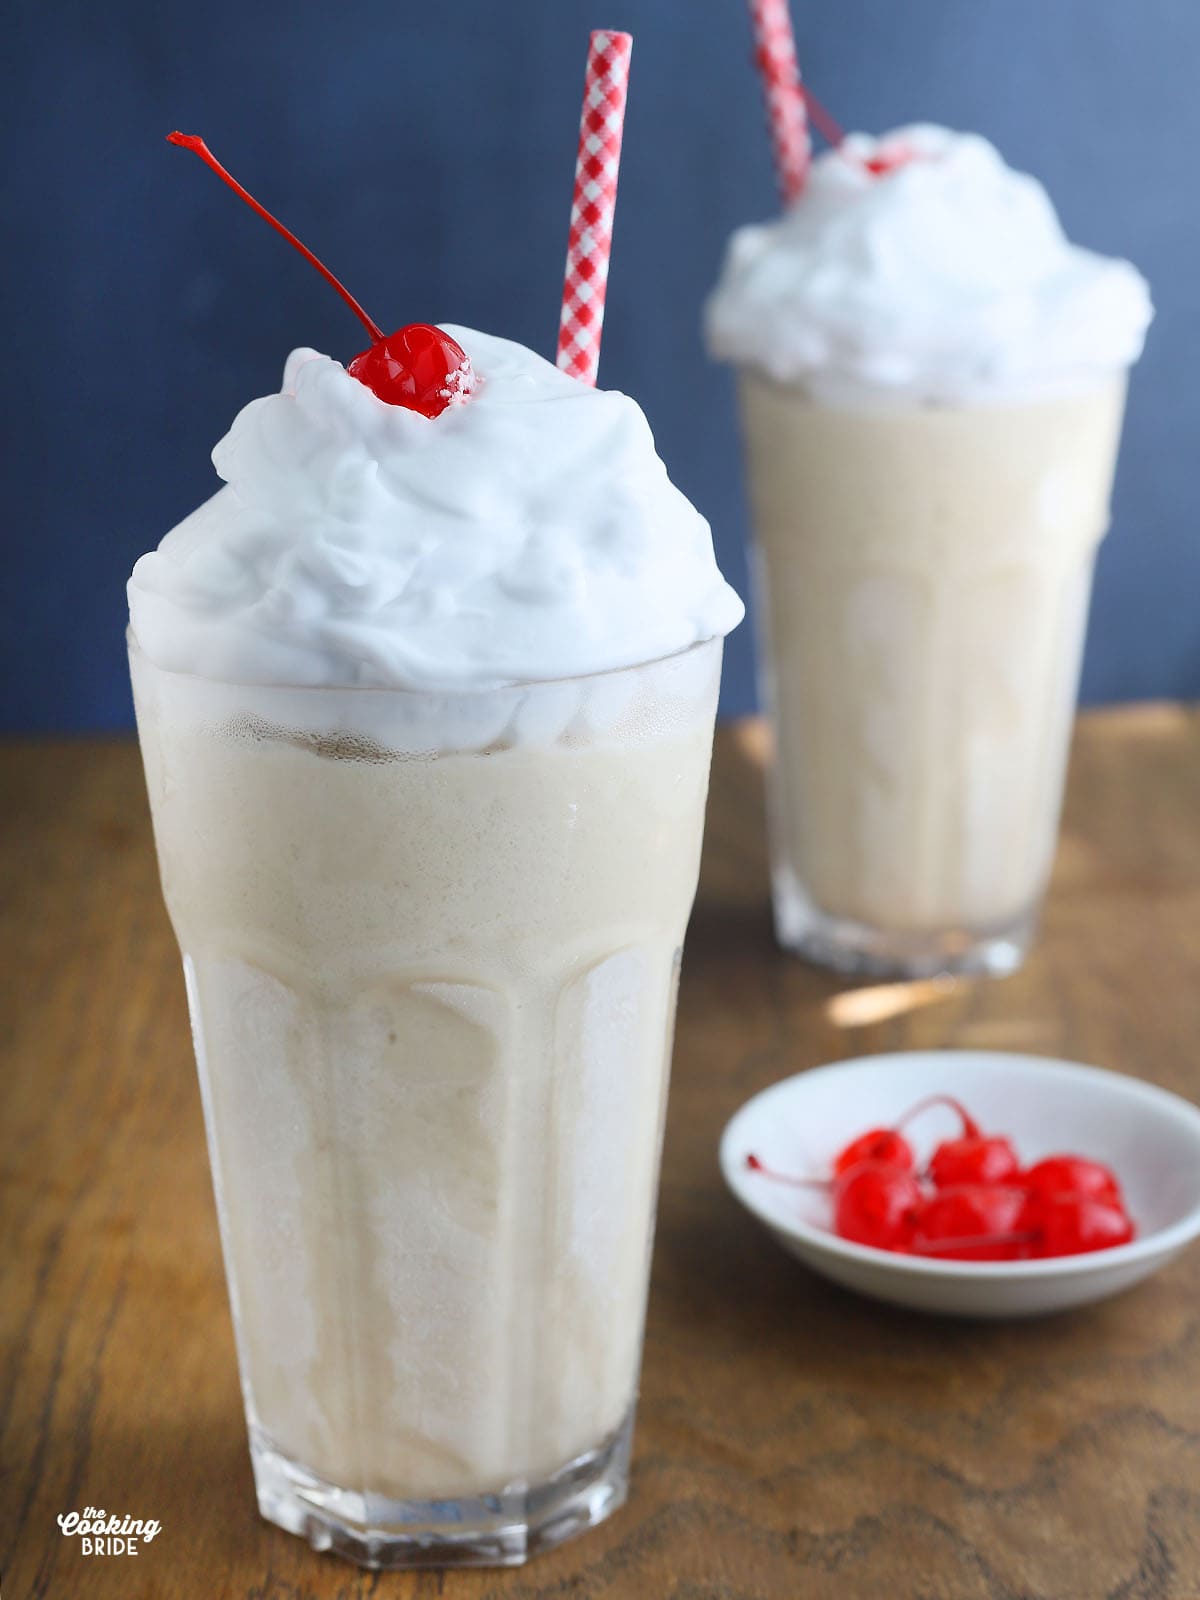 two frozen bushwacker cocktails with whipped cream, cherries and a red and white straw. Small dish of cherries to the side.